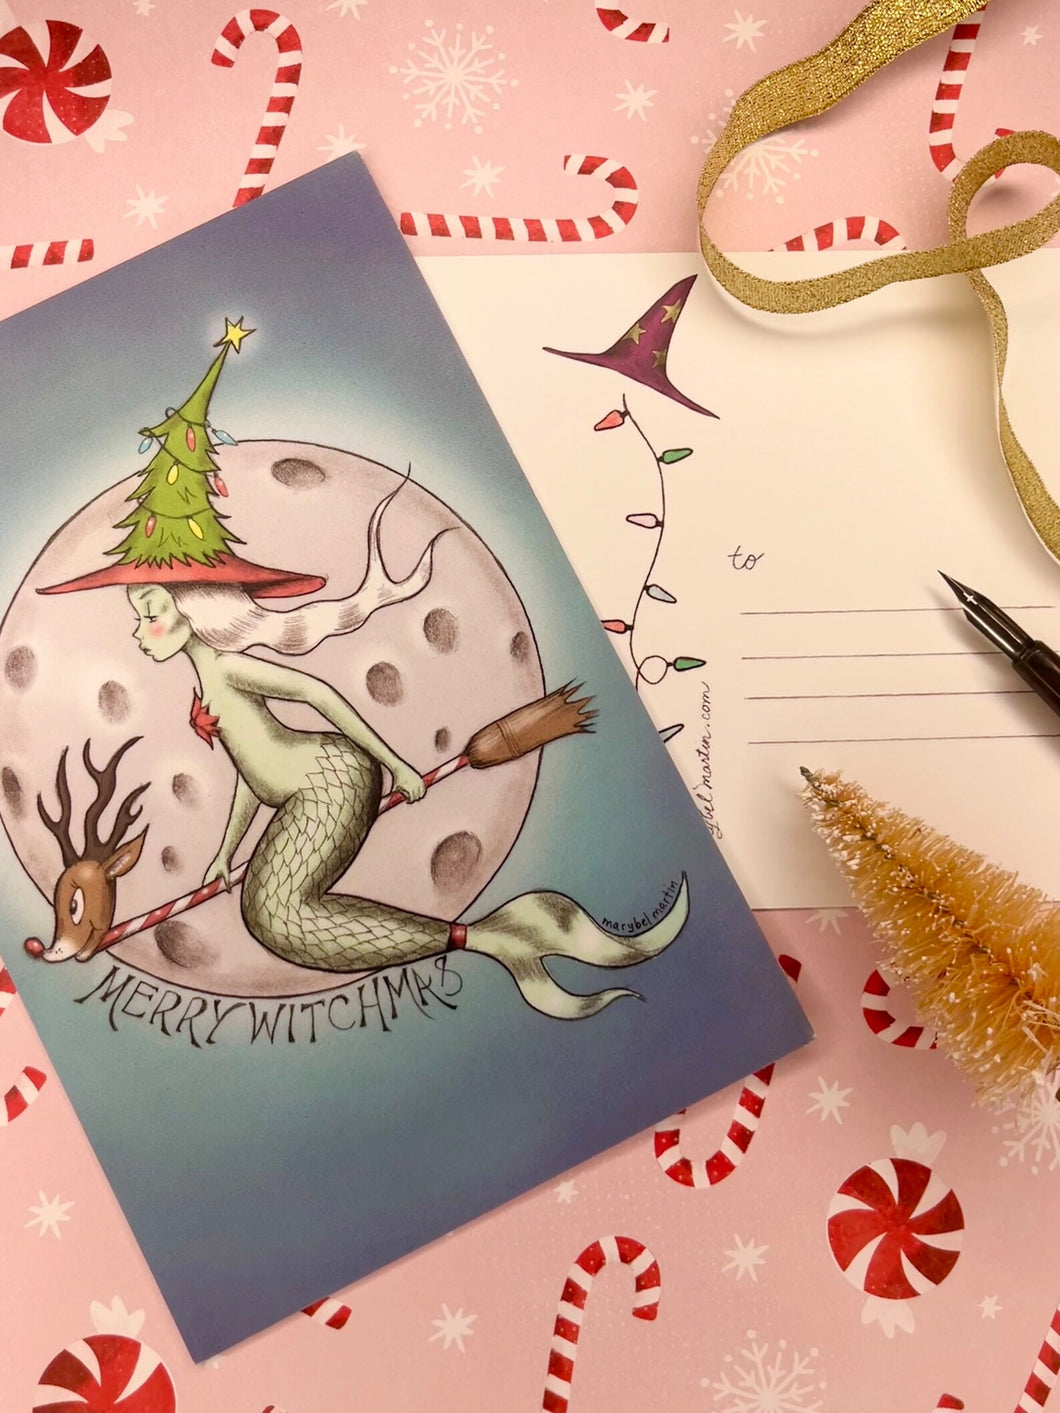 Merry Witchmas! postcard by Marybel Martin 4 x 6